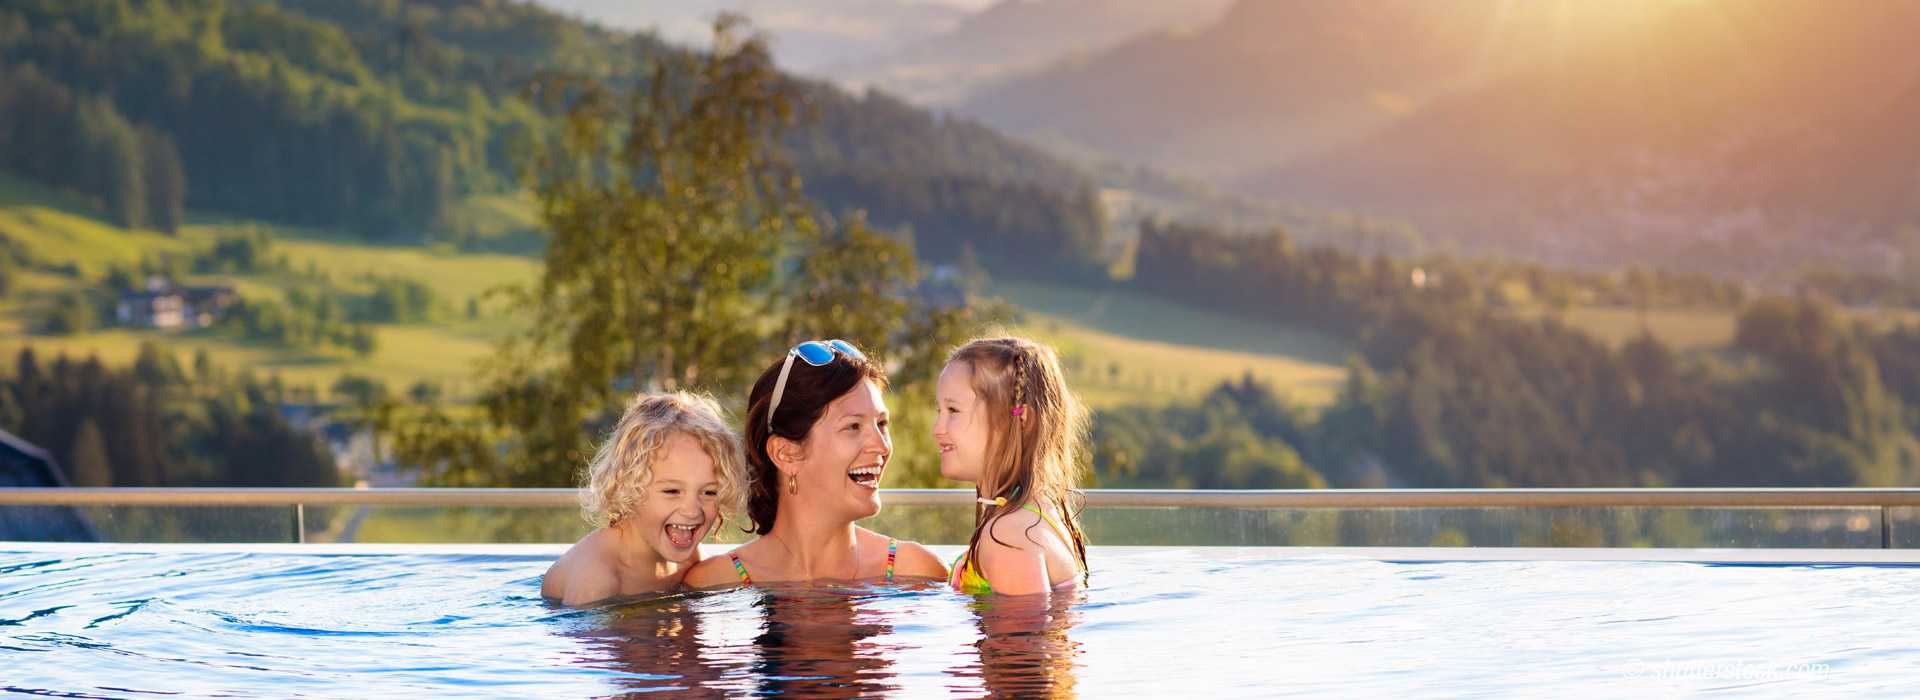 Family-Wellness in Leogang